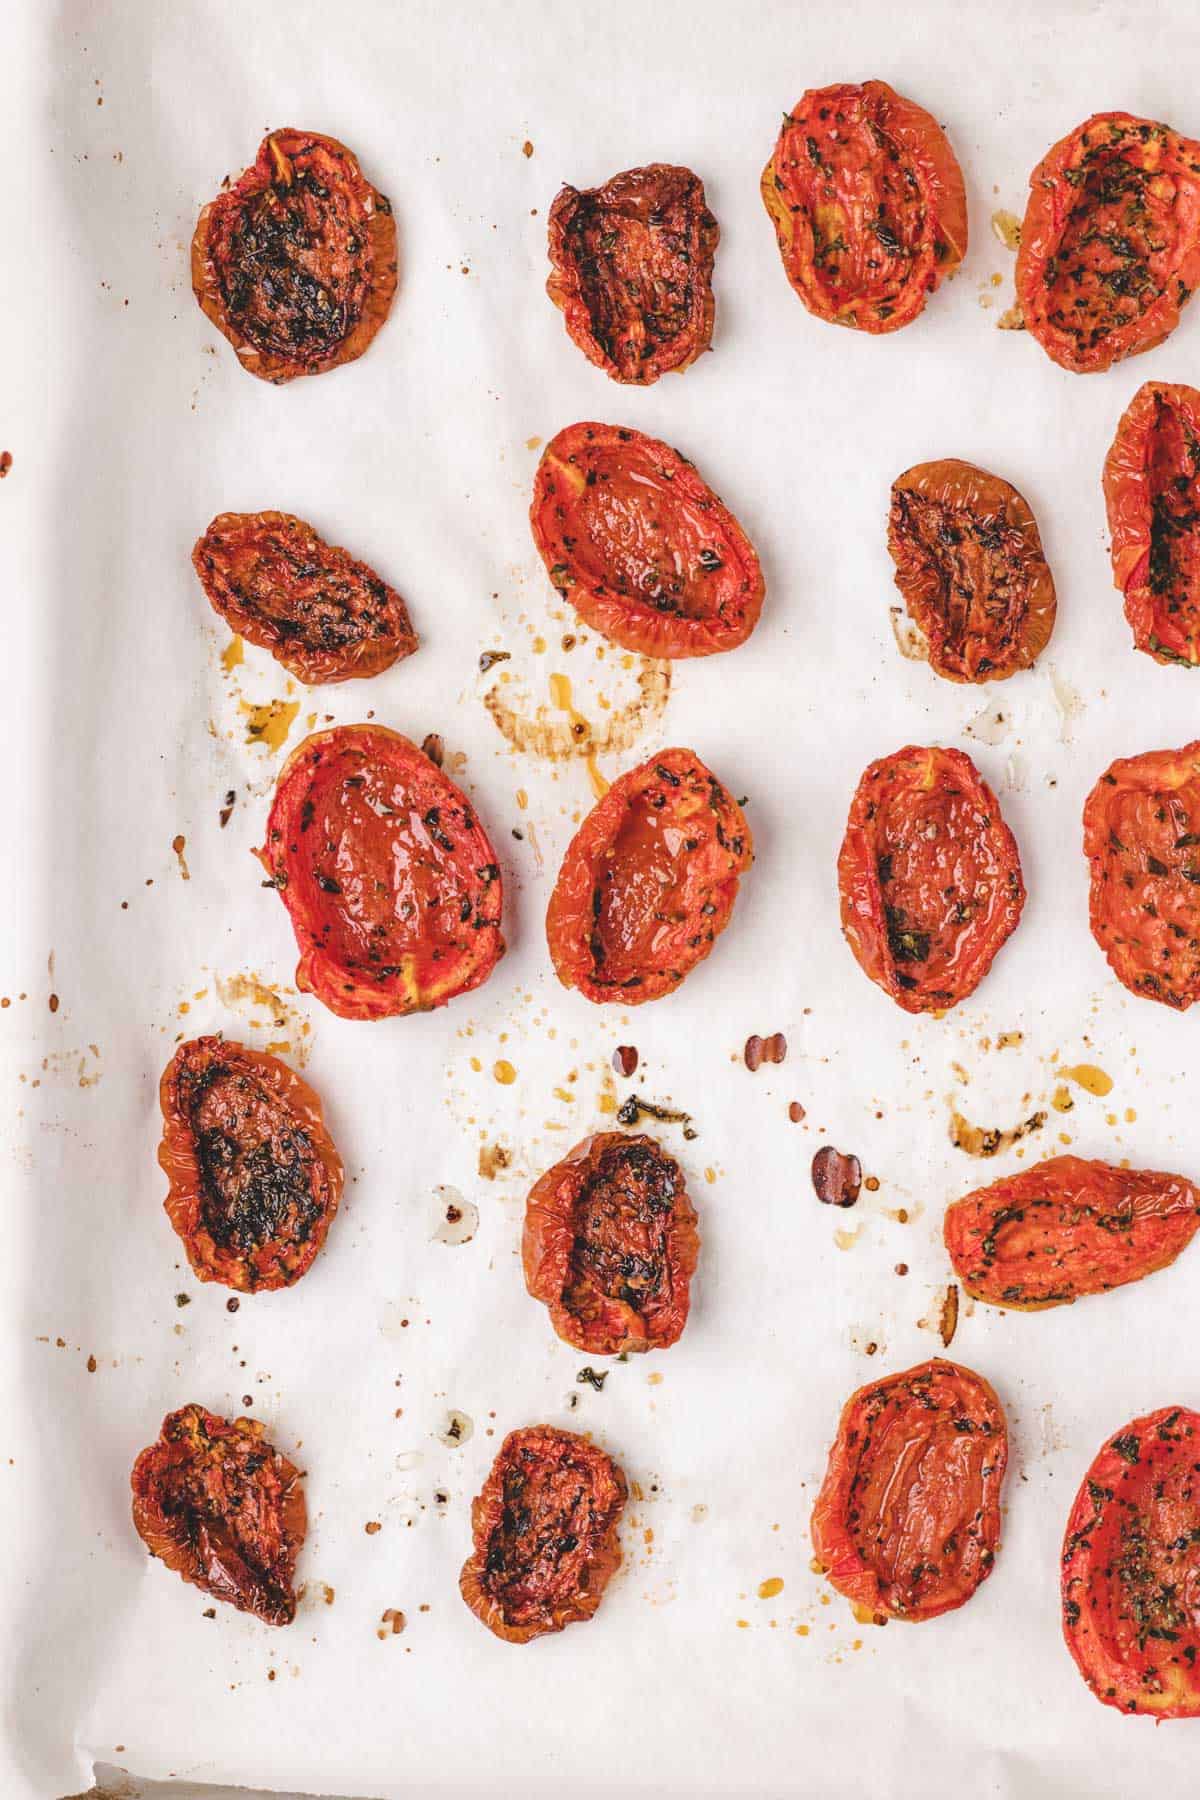 Slow roasted tomatoes that have been cooked and are now on a baking tray.